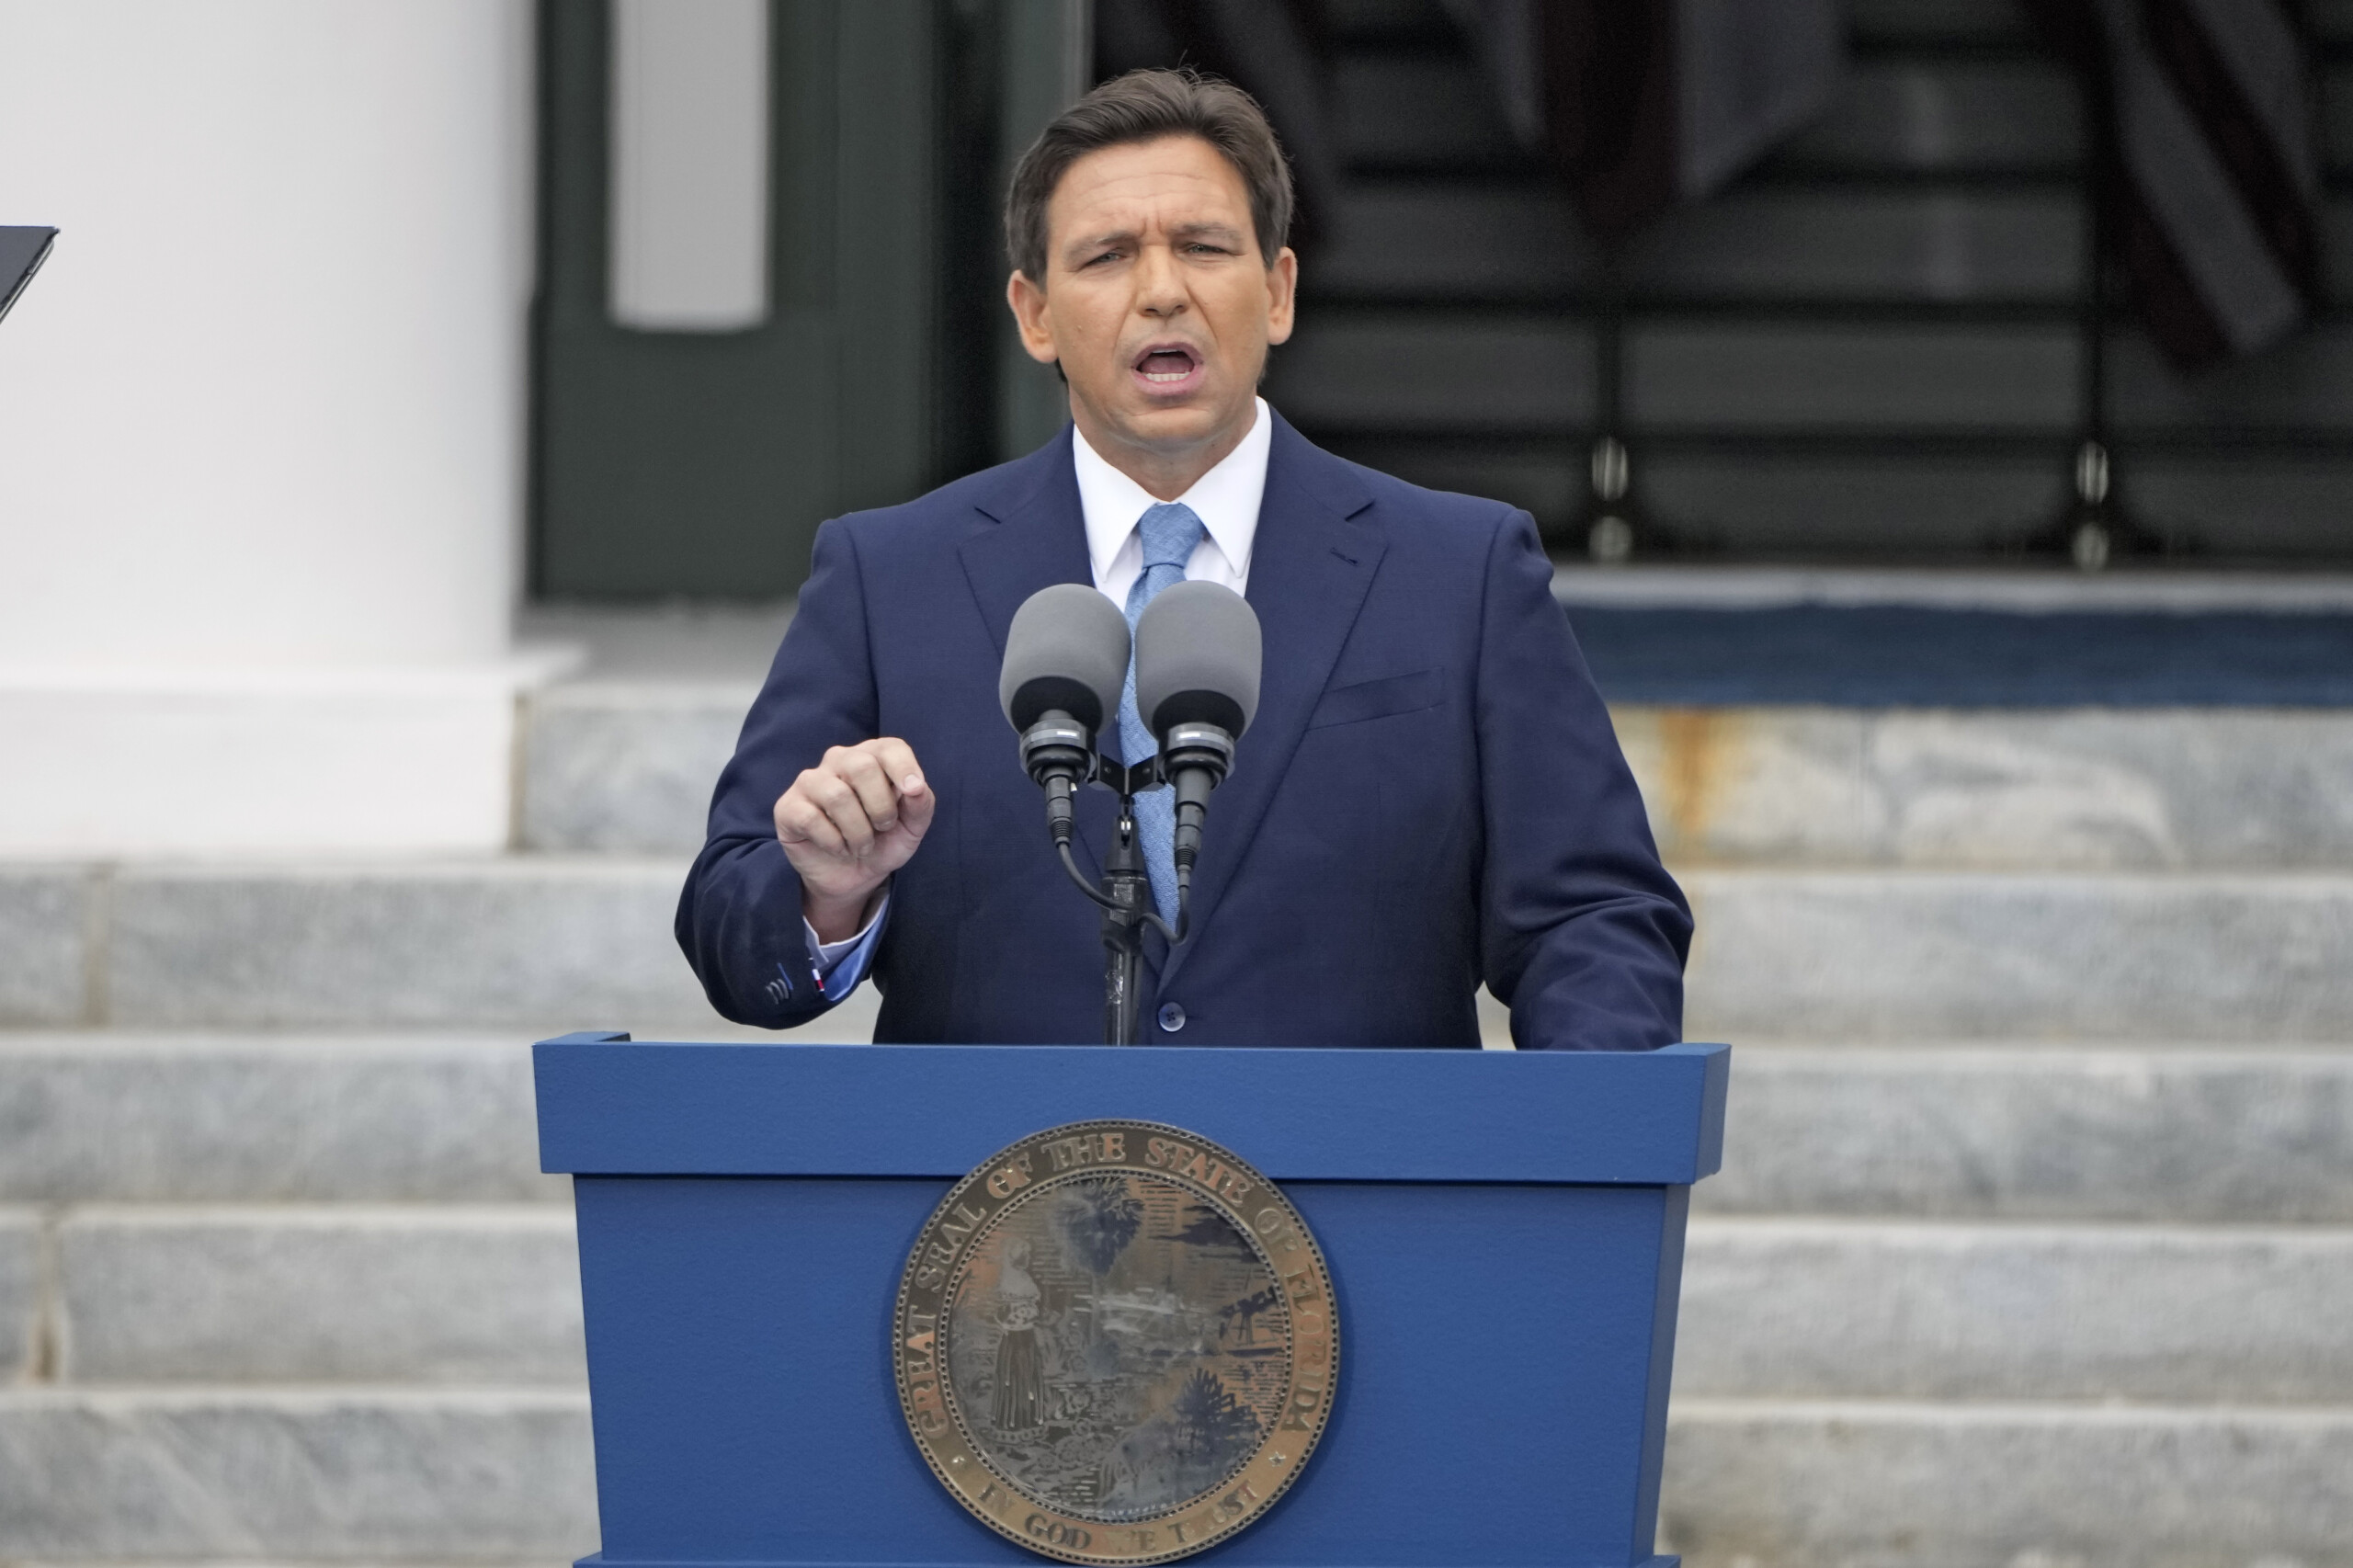 Gov. Ron DeSantis speaks to the crowd after being sworn in to begin his second term during an inauguration ceremony outside the Old Capitol on Jan. 3, 2023. | Lynne Sladky, AP